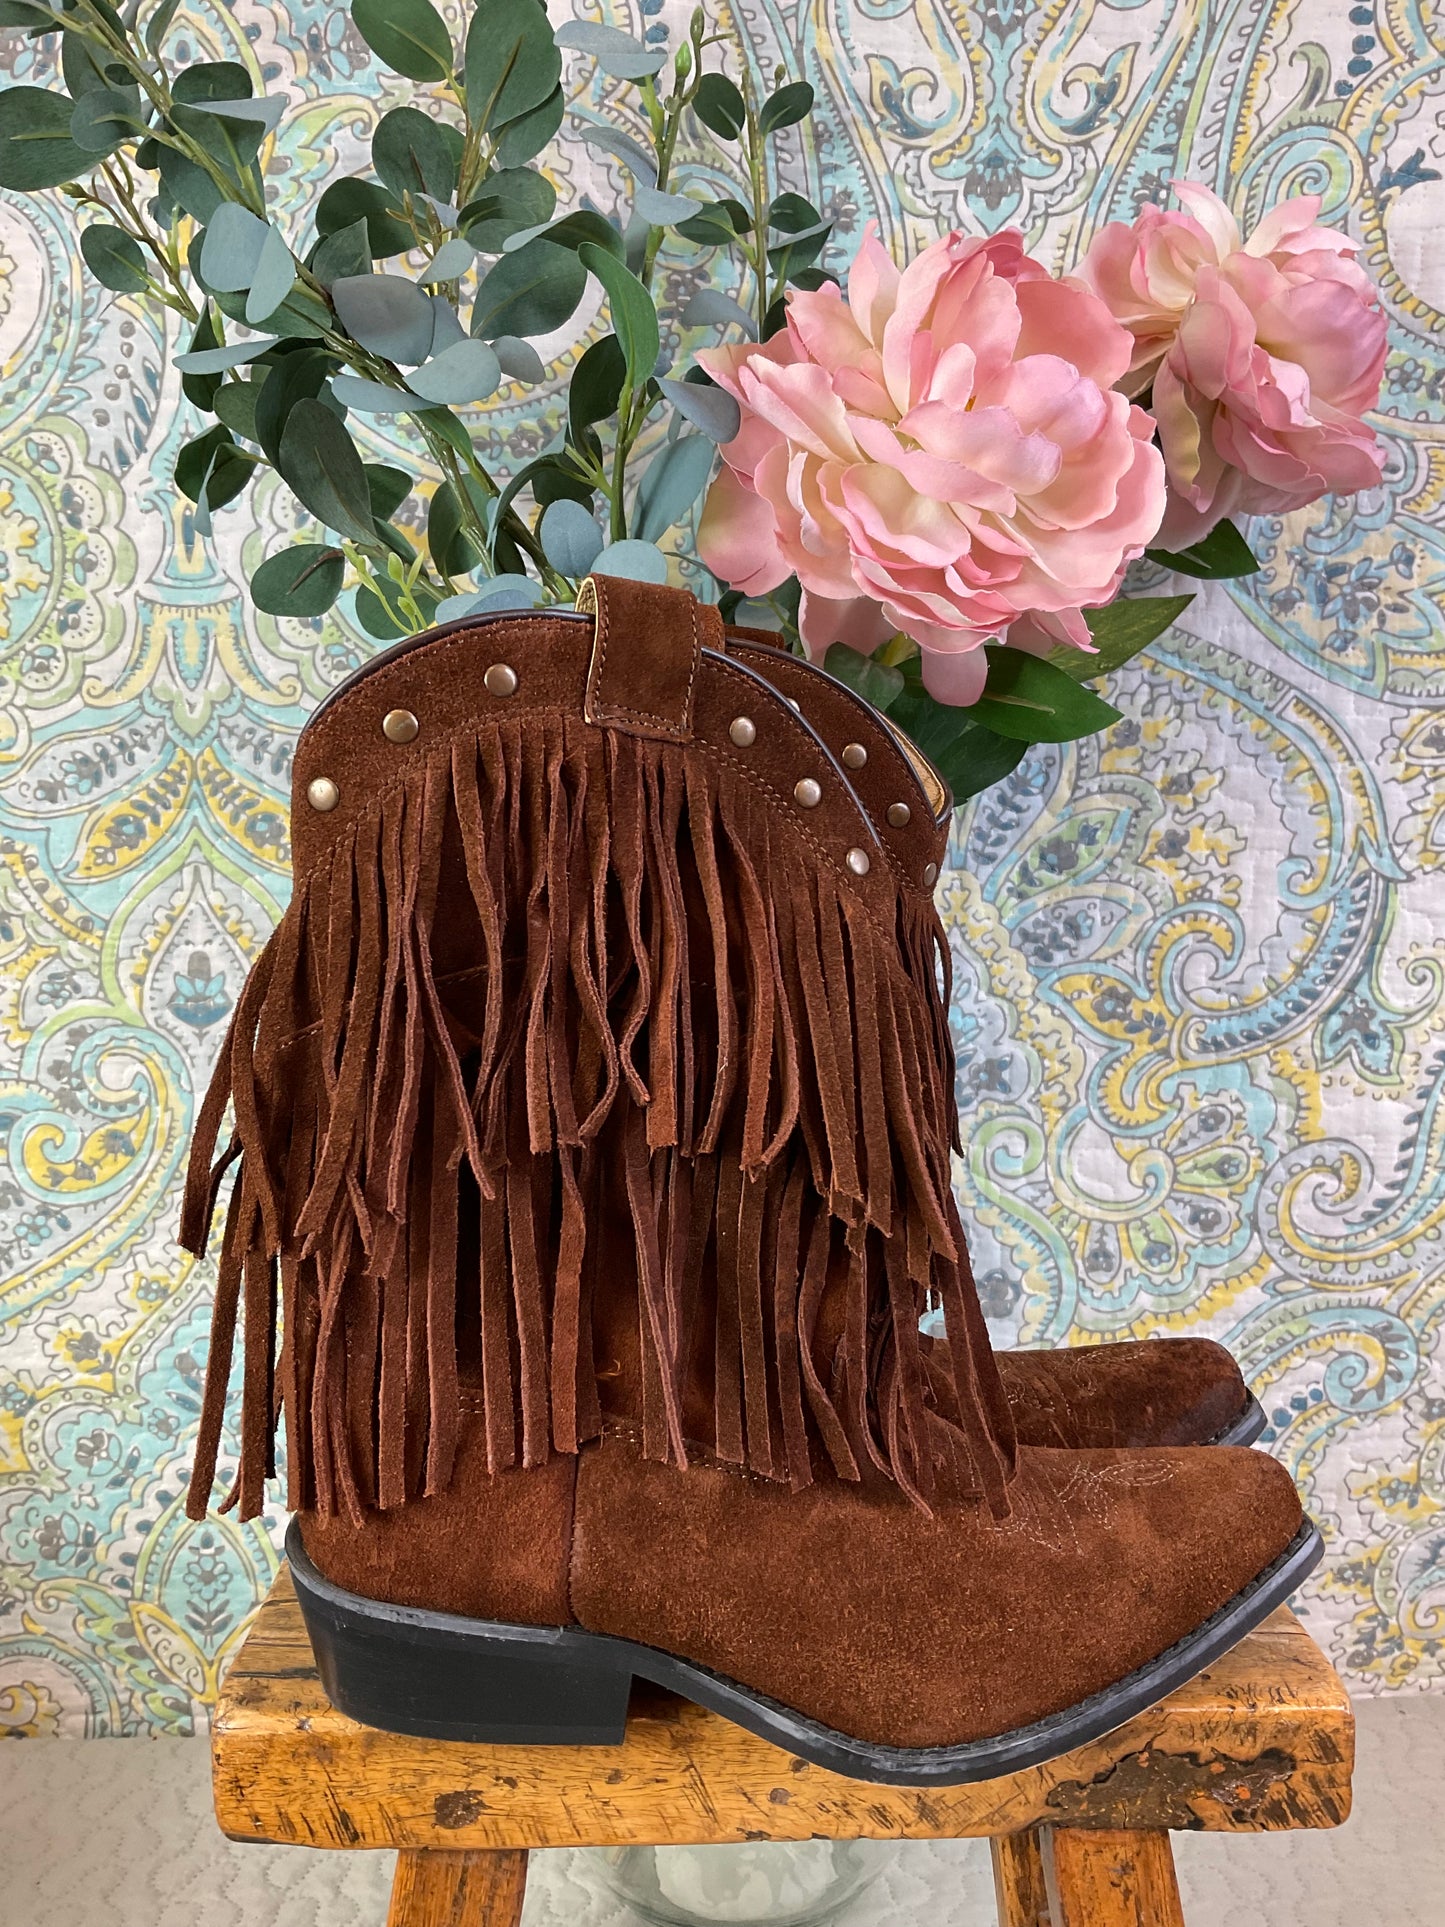 Shyanne Suede Fringe Boots, Size 2